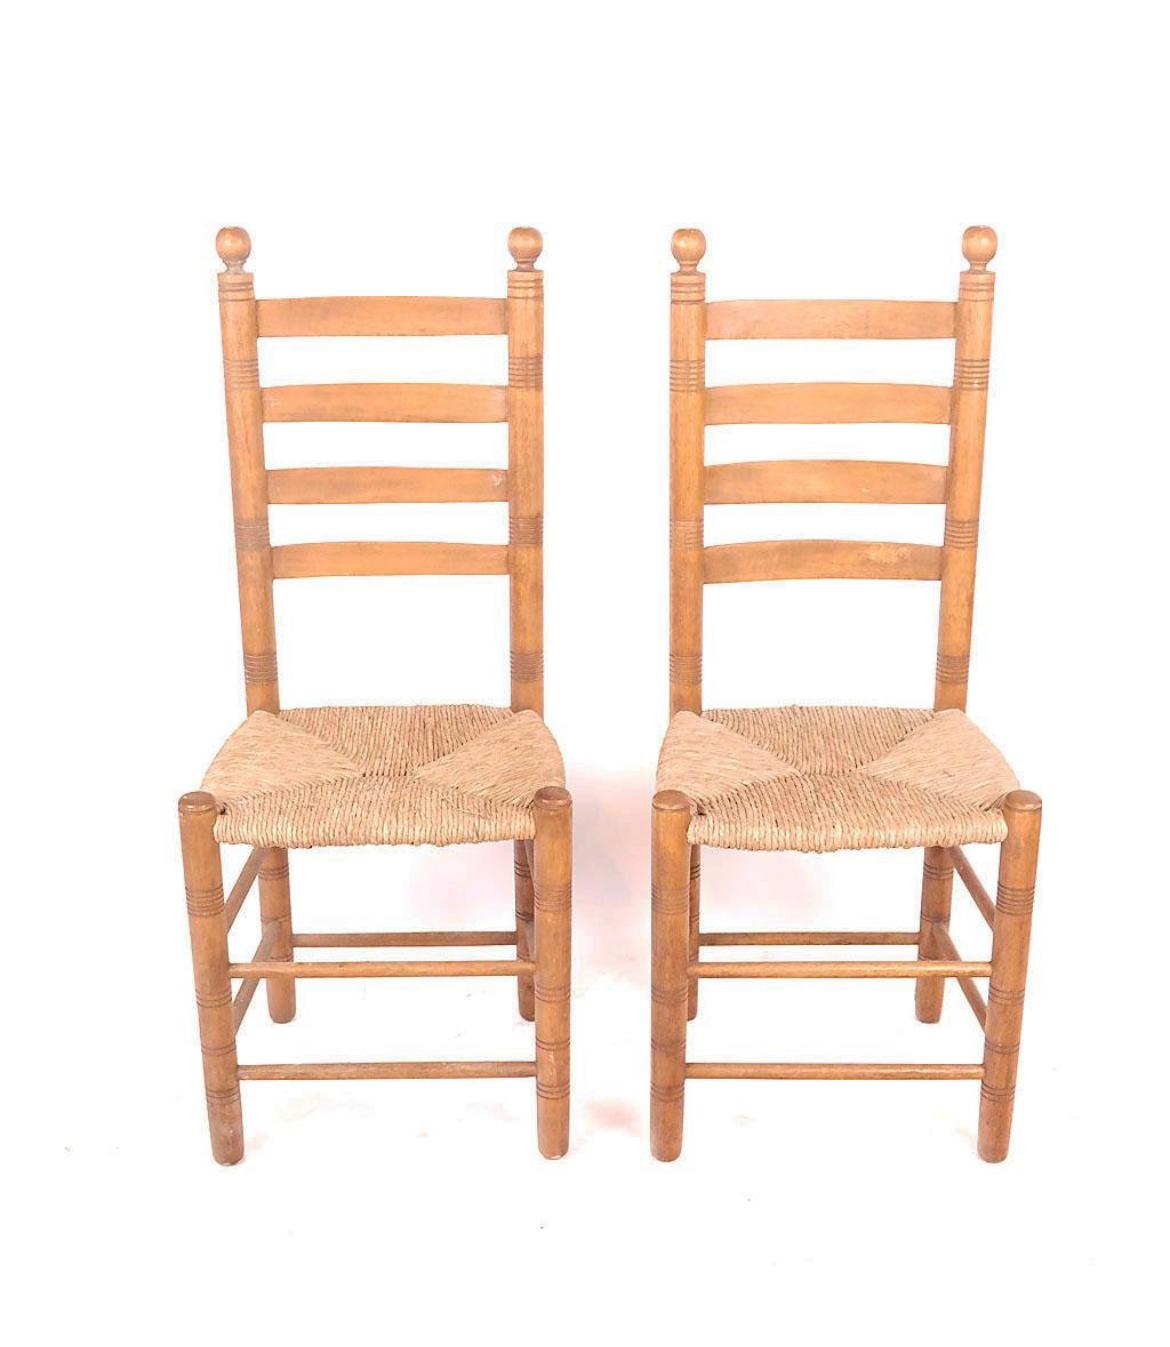 Beautiful set of 8 Early American Shaker style chairs. All chairs match with a high ladder back design with ball tops. Hand crafted details using primitive yet masterful techniques. Rush seats have varying patina but all in good condition. Great in